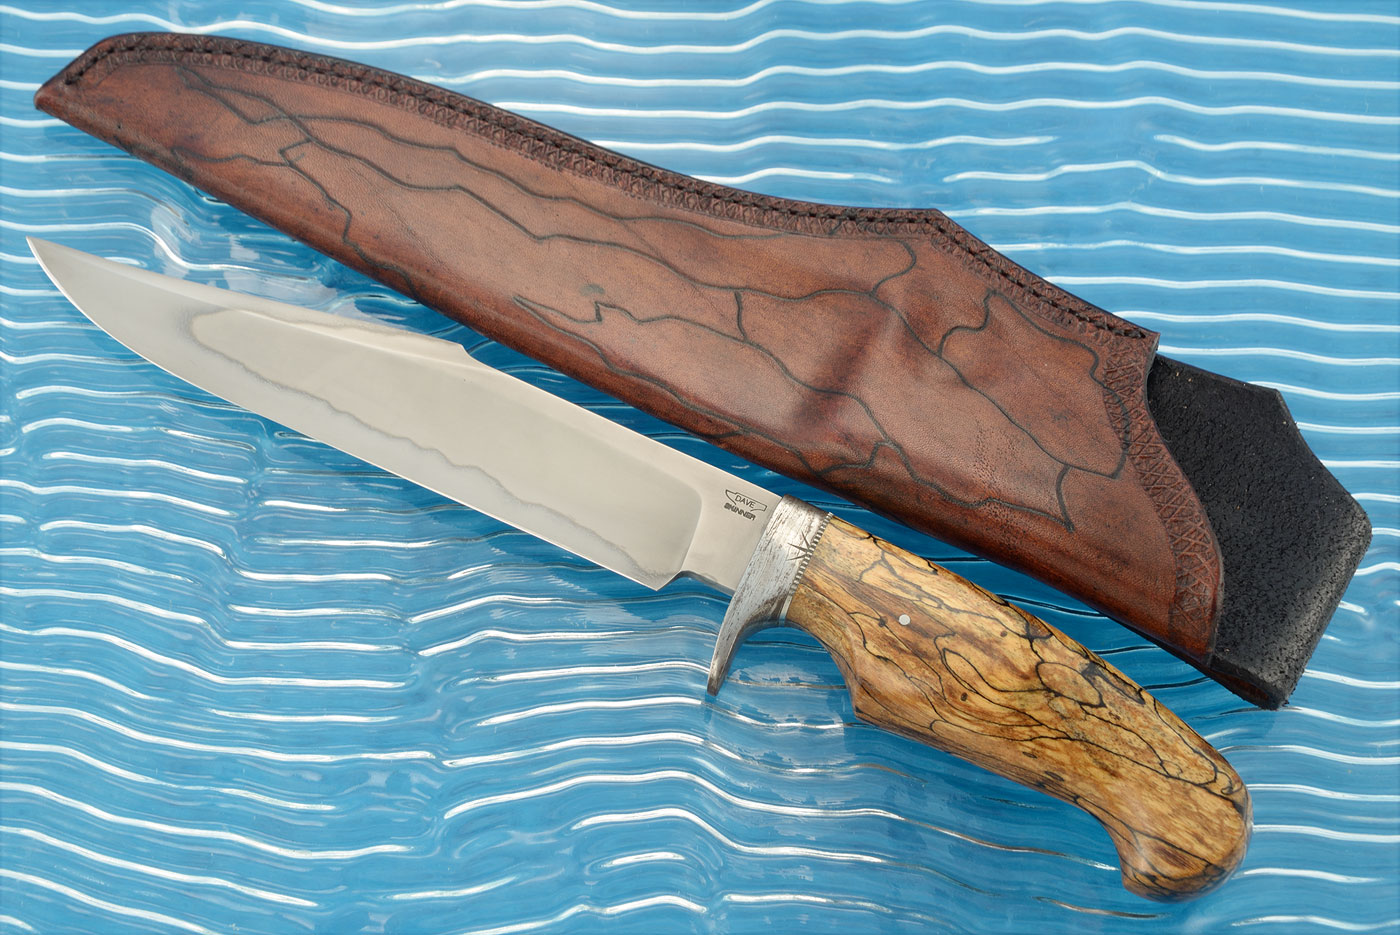 Hamon Fighter with Spalted Birch